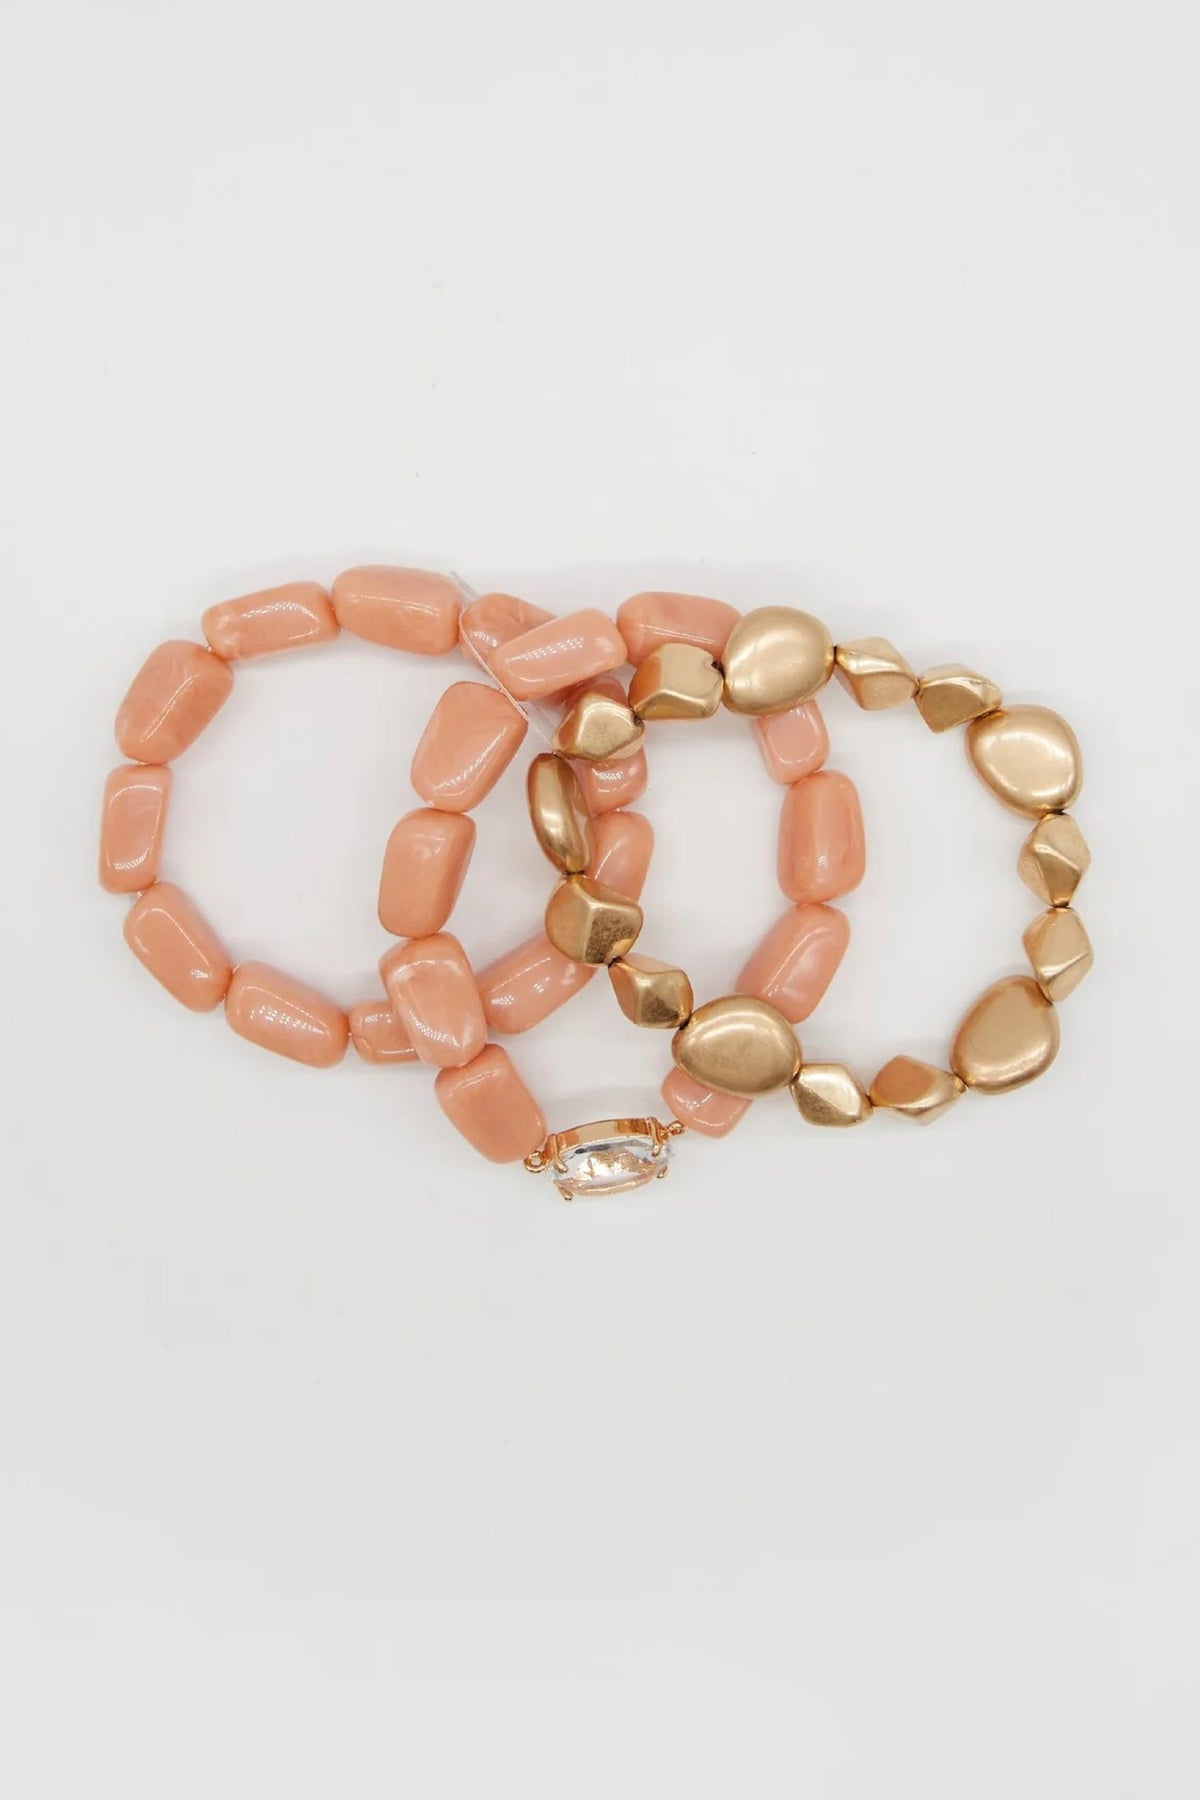 Peach and Gold Beads Bracelet